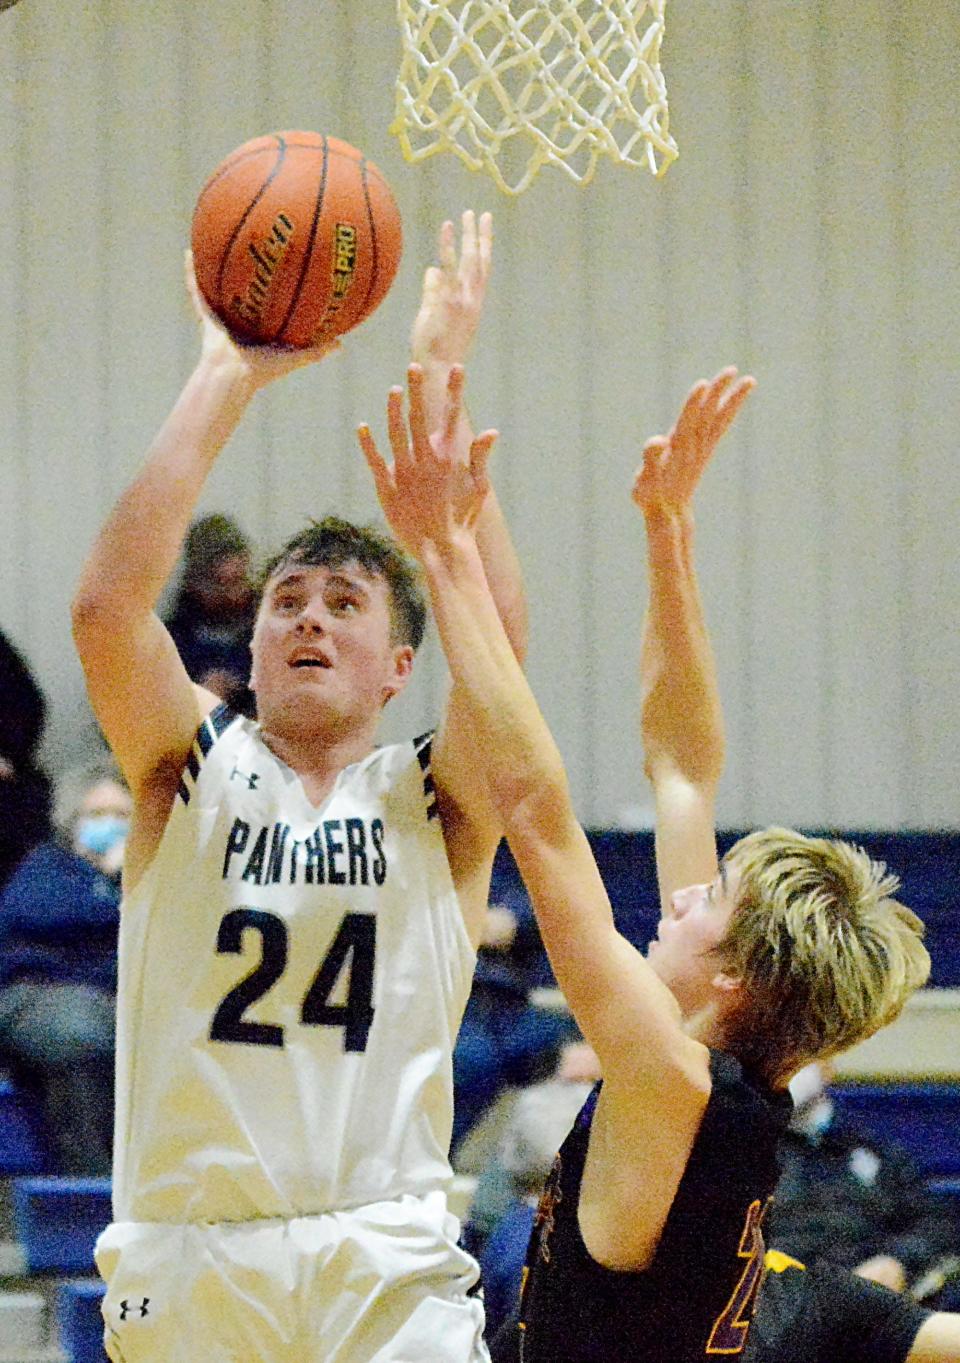 Senior forward Sam Hansen (24) is one of the leading returnees for the 2021-22 Great Plains Lutheran High School boys basketball team. The Panthers open their season this weekend at the Martin Luther College tournament in New Ulm, Minn.